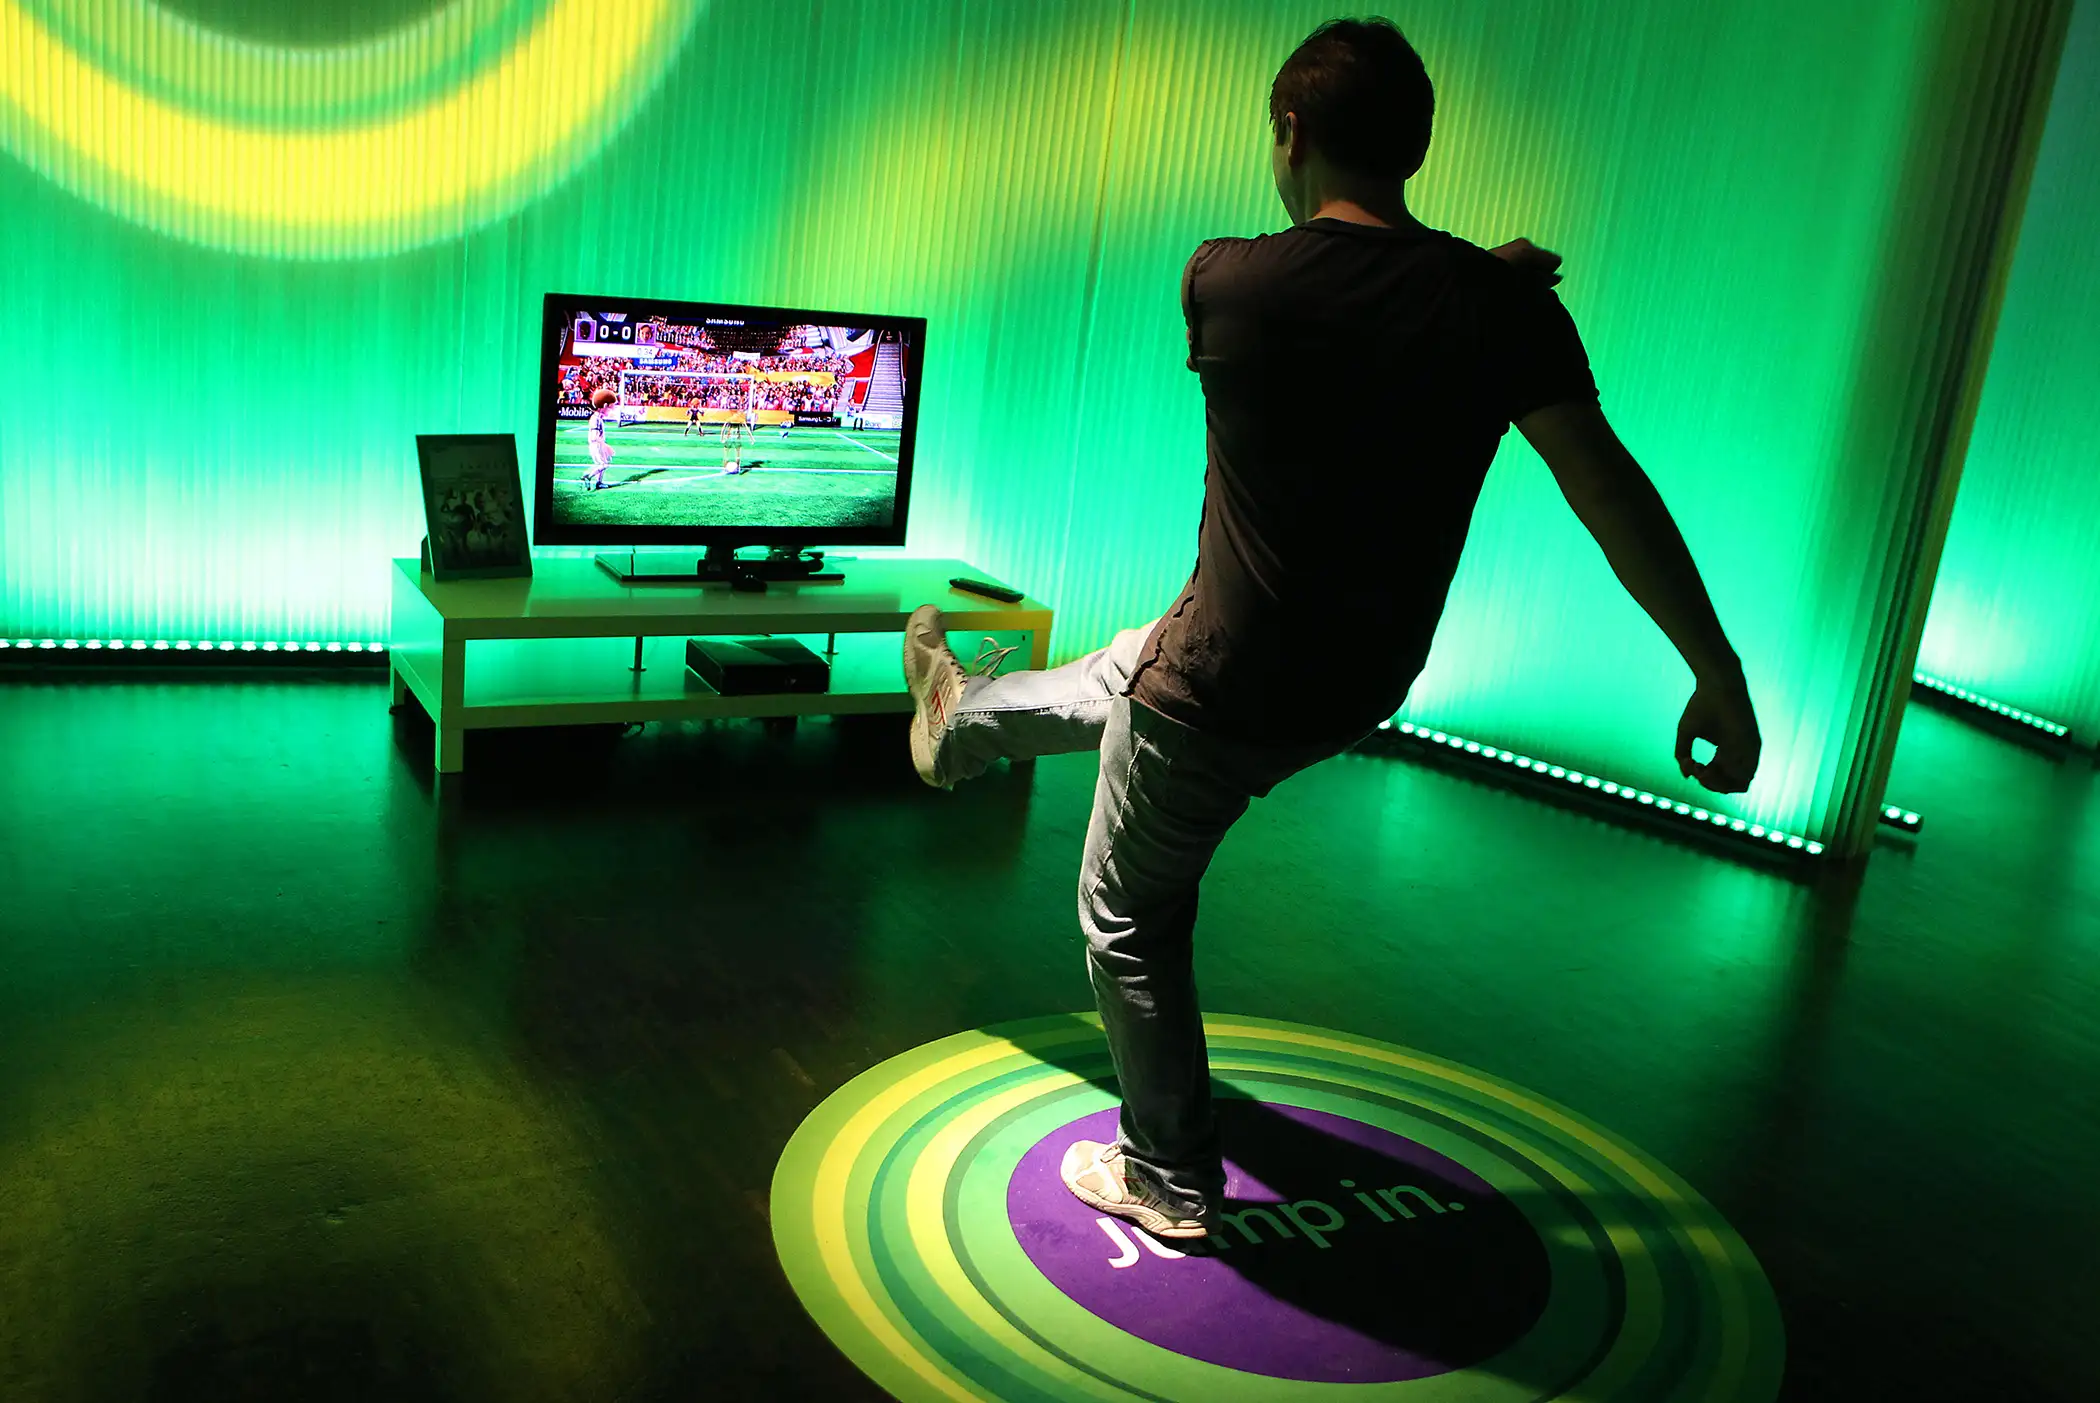 A man checks out Microsoft's new Xbox 360 equipped with 'Kinect' kinetic controller at the Gamescom trade fair in Cologne, Germany, on August 17, 2010.